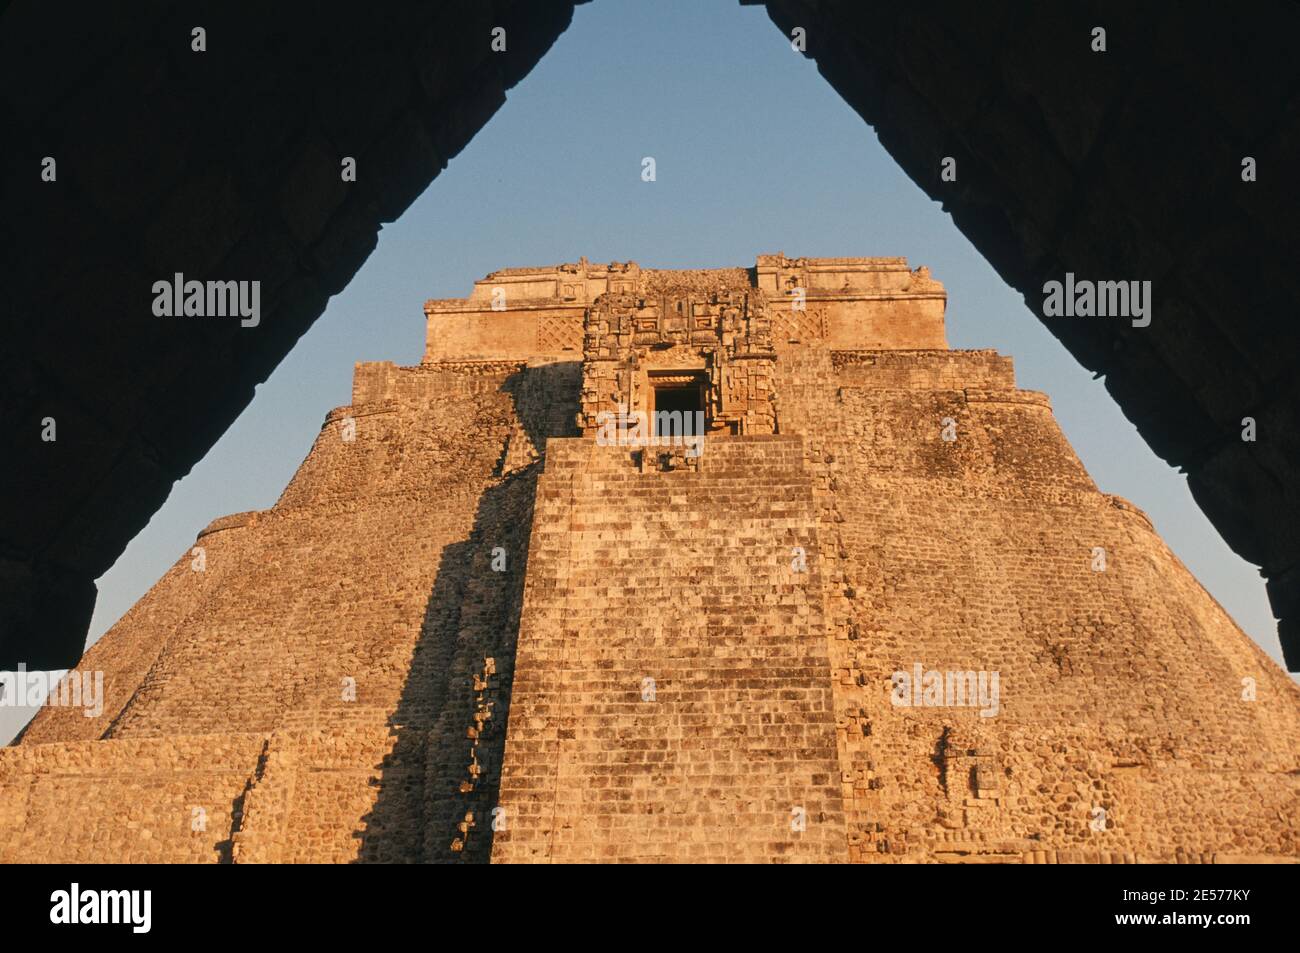 Uxmal, La Pyramida Del Adivino, Legend has it that it was built by a dwarf magician ruler in one night, Stock Photo